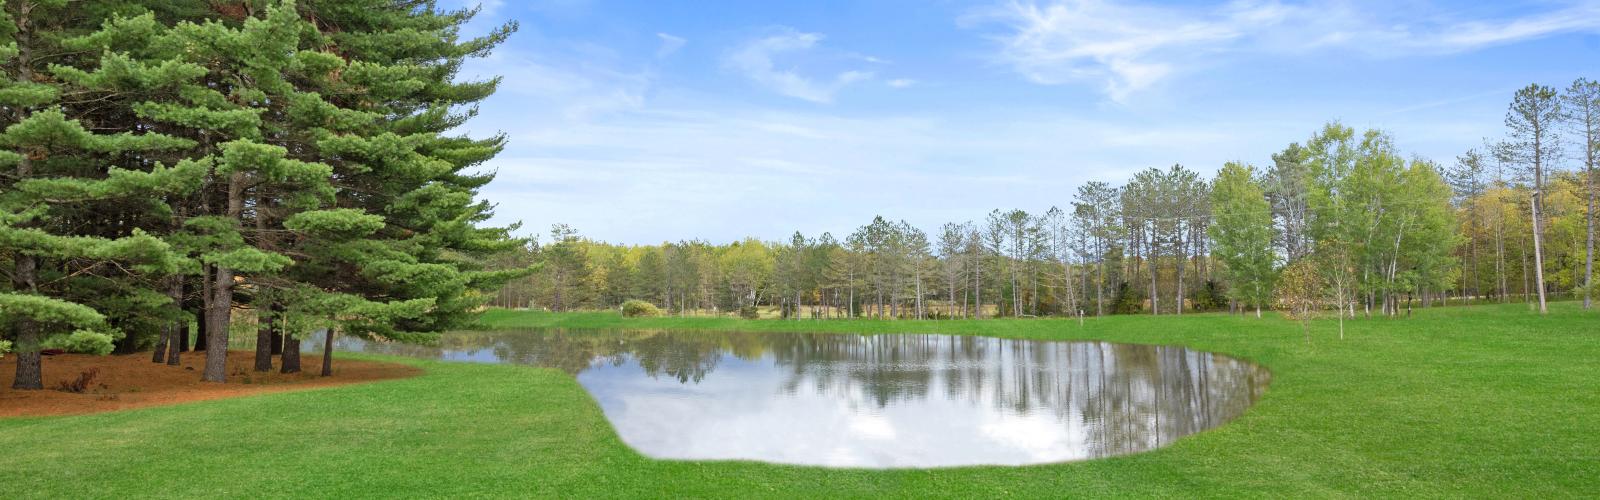 Take a Dip in our one-acre pond with sandy beach